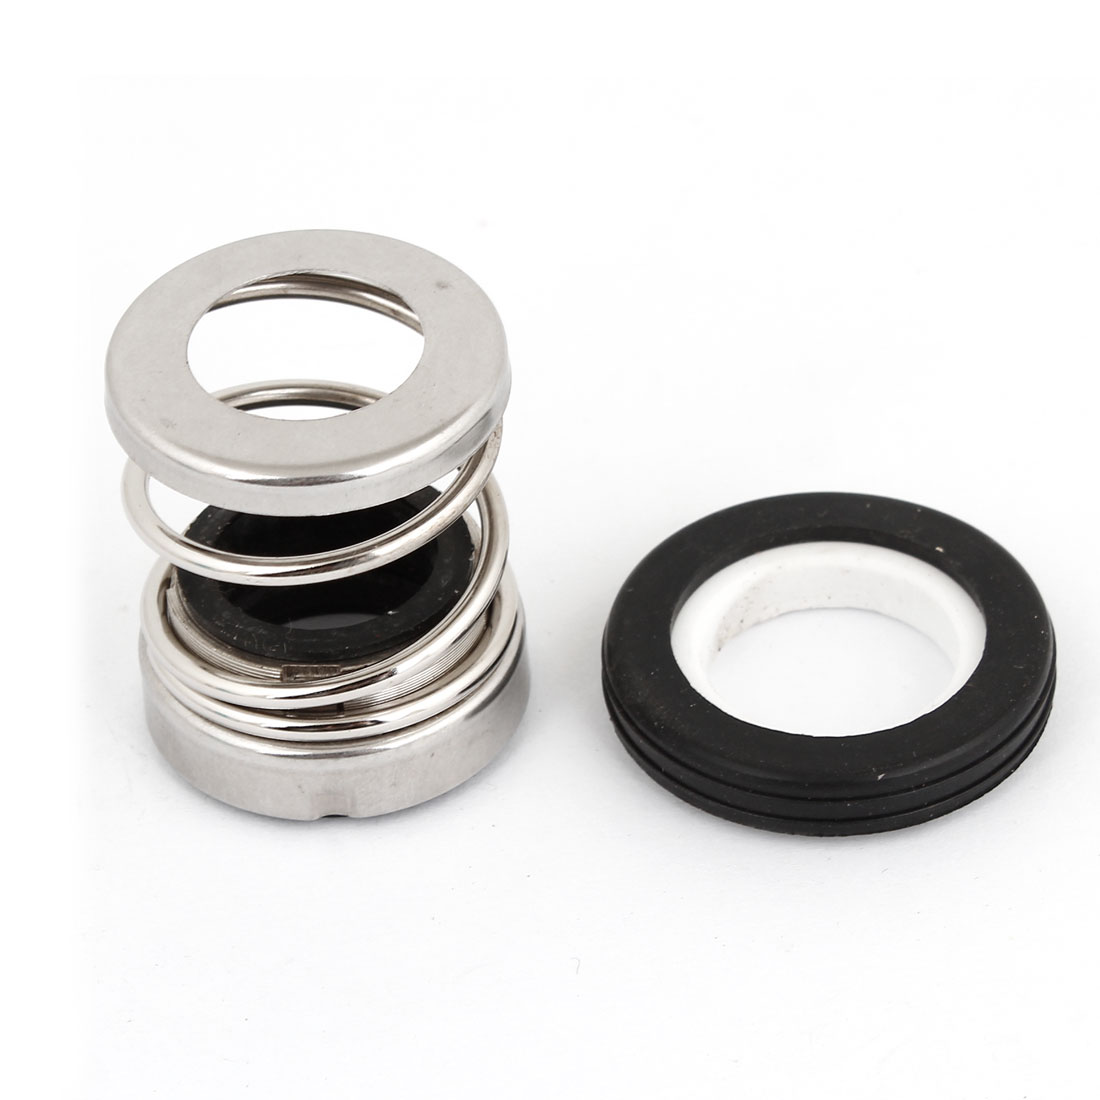 Unique Bargains 16mm Inner Dia Water Pump Mechanical Shaft Seal Replacement